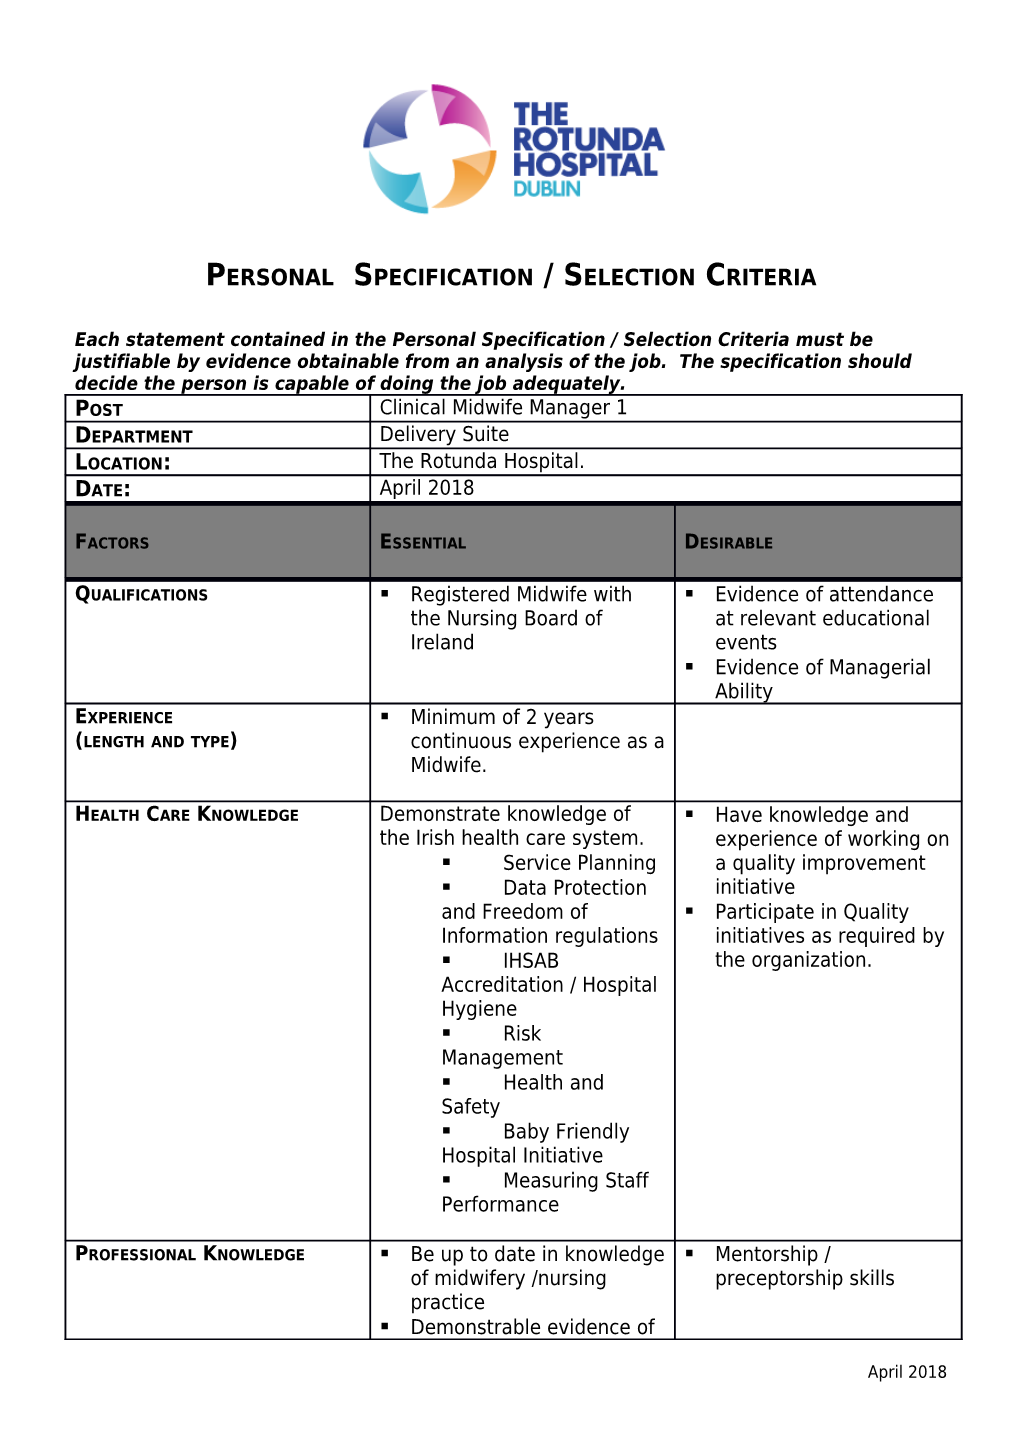 Personal Specification / Selection Criteria